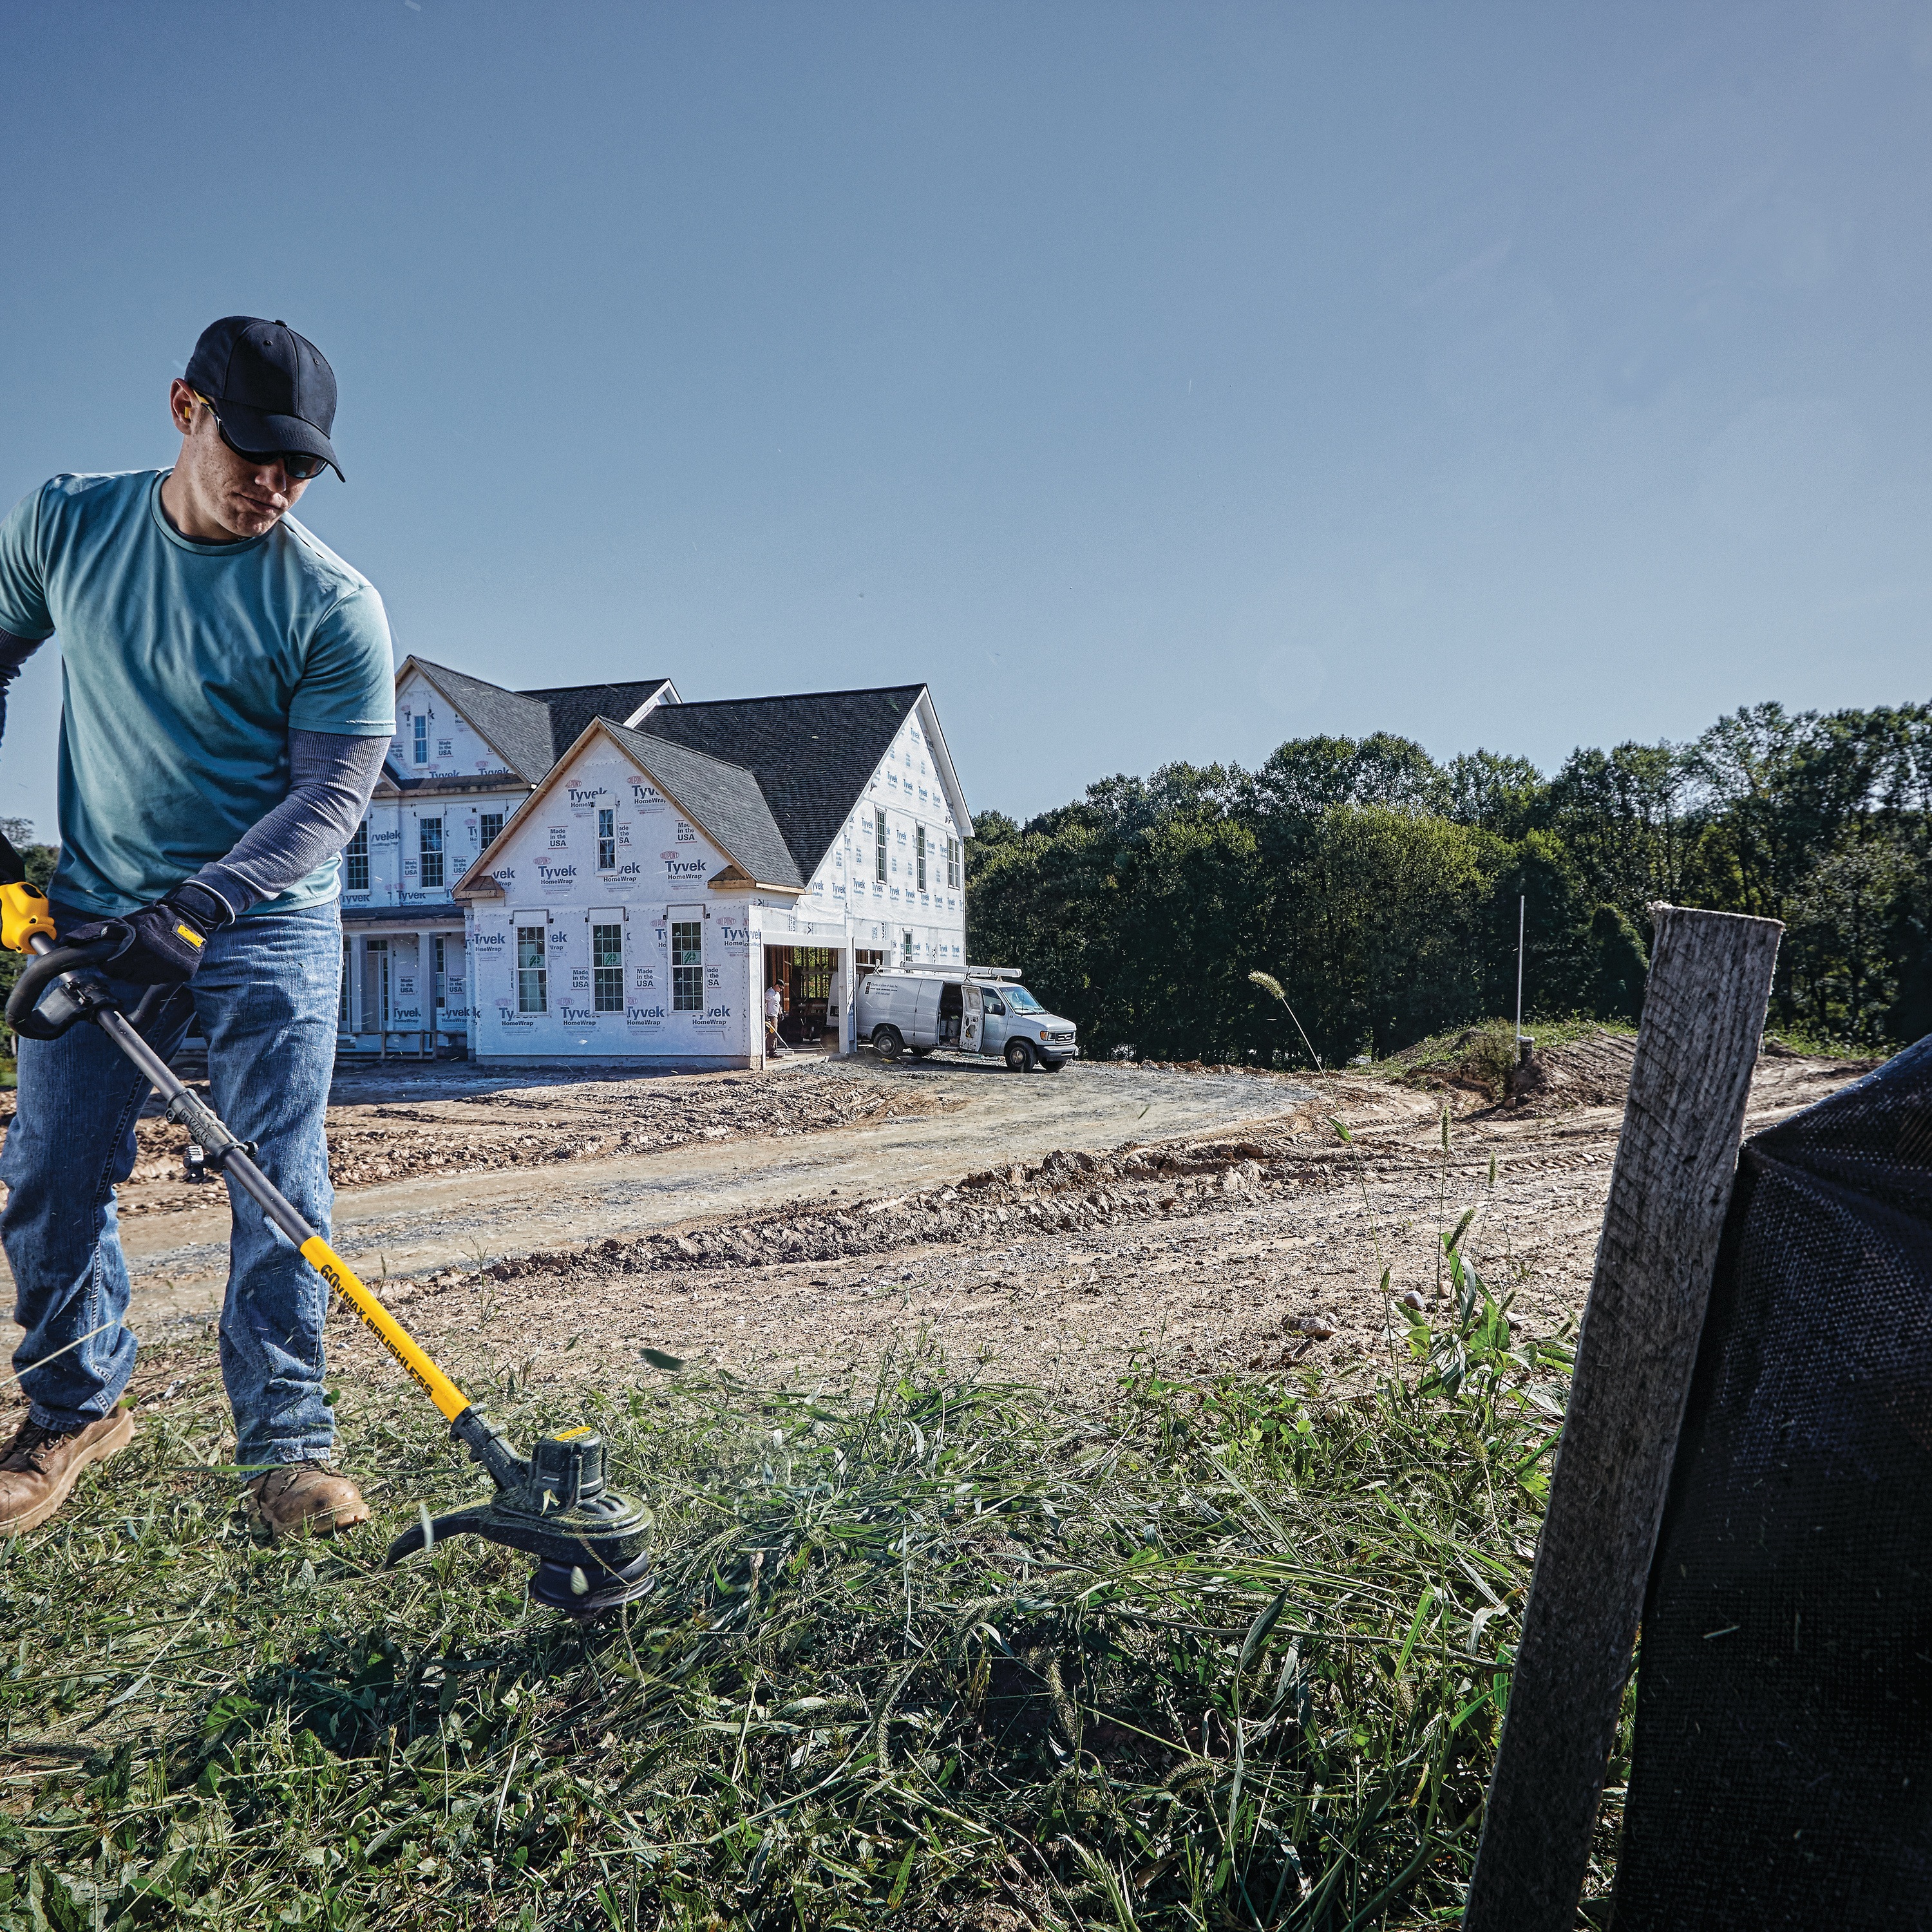 Cordless String Trimmer being used by a person.